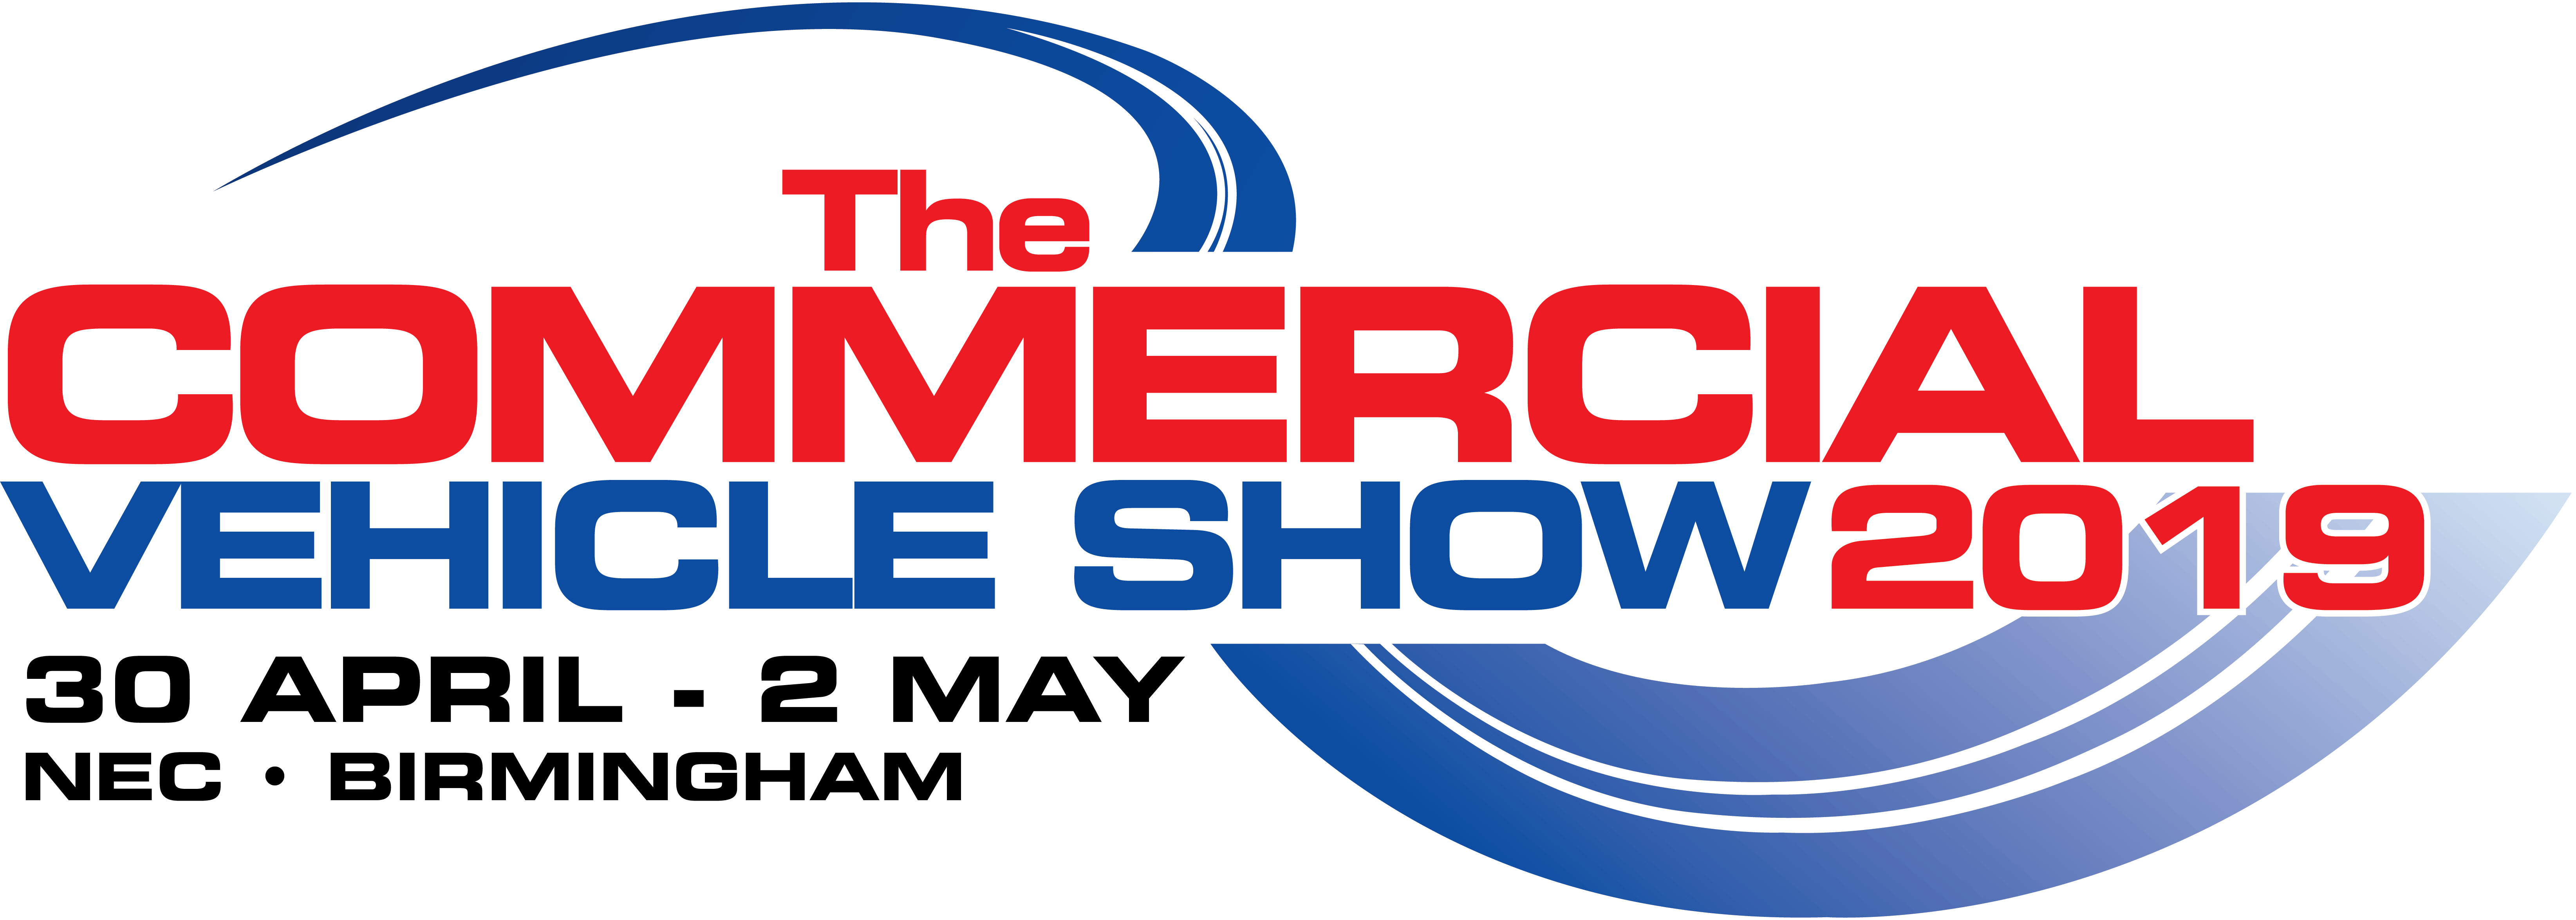 Red Oval Automotive Logo - Commercial Vehicle Show - SMMT